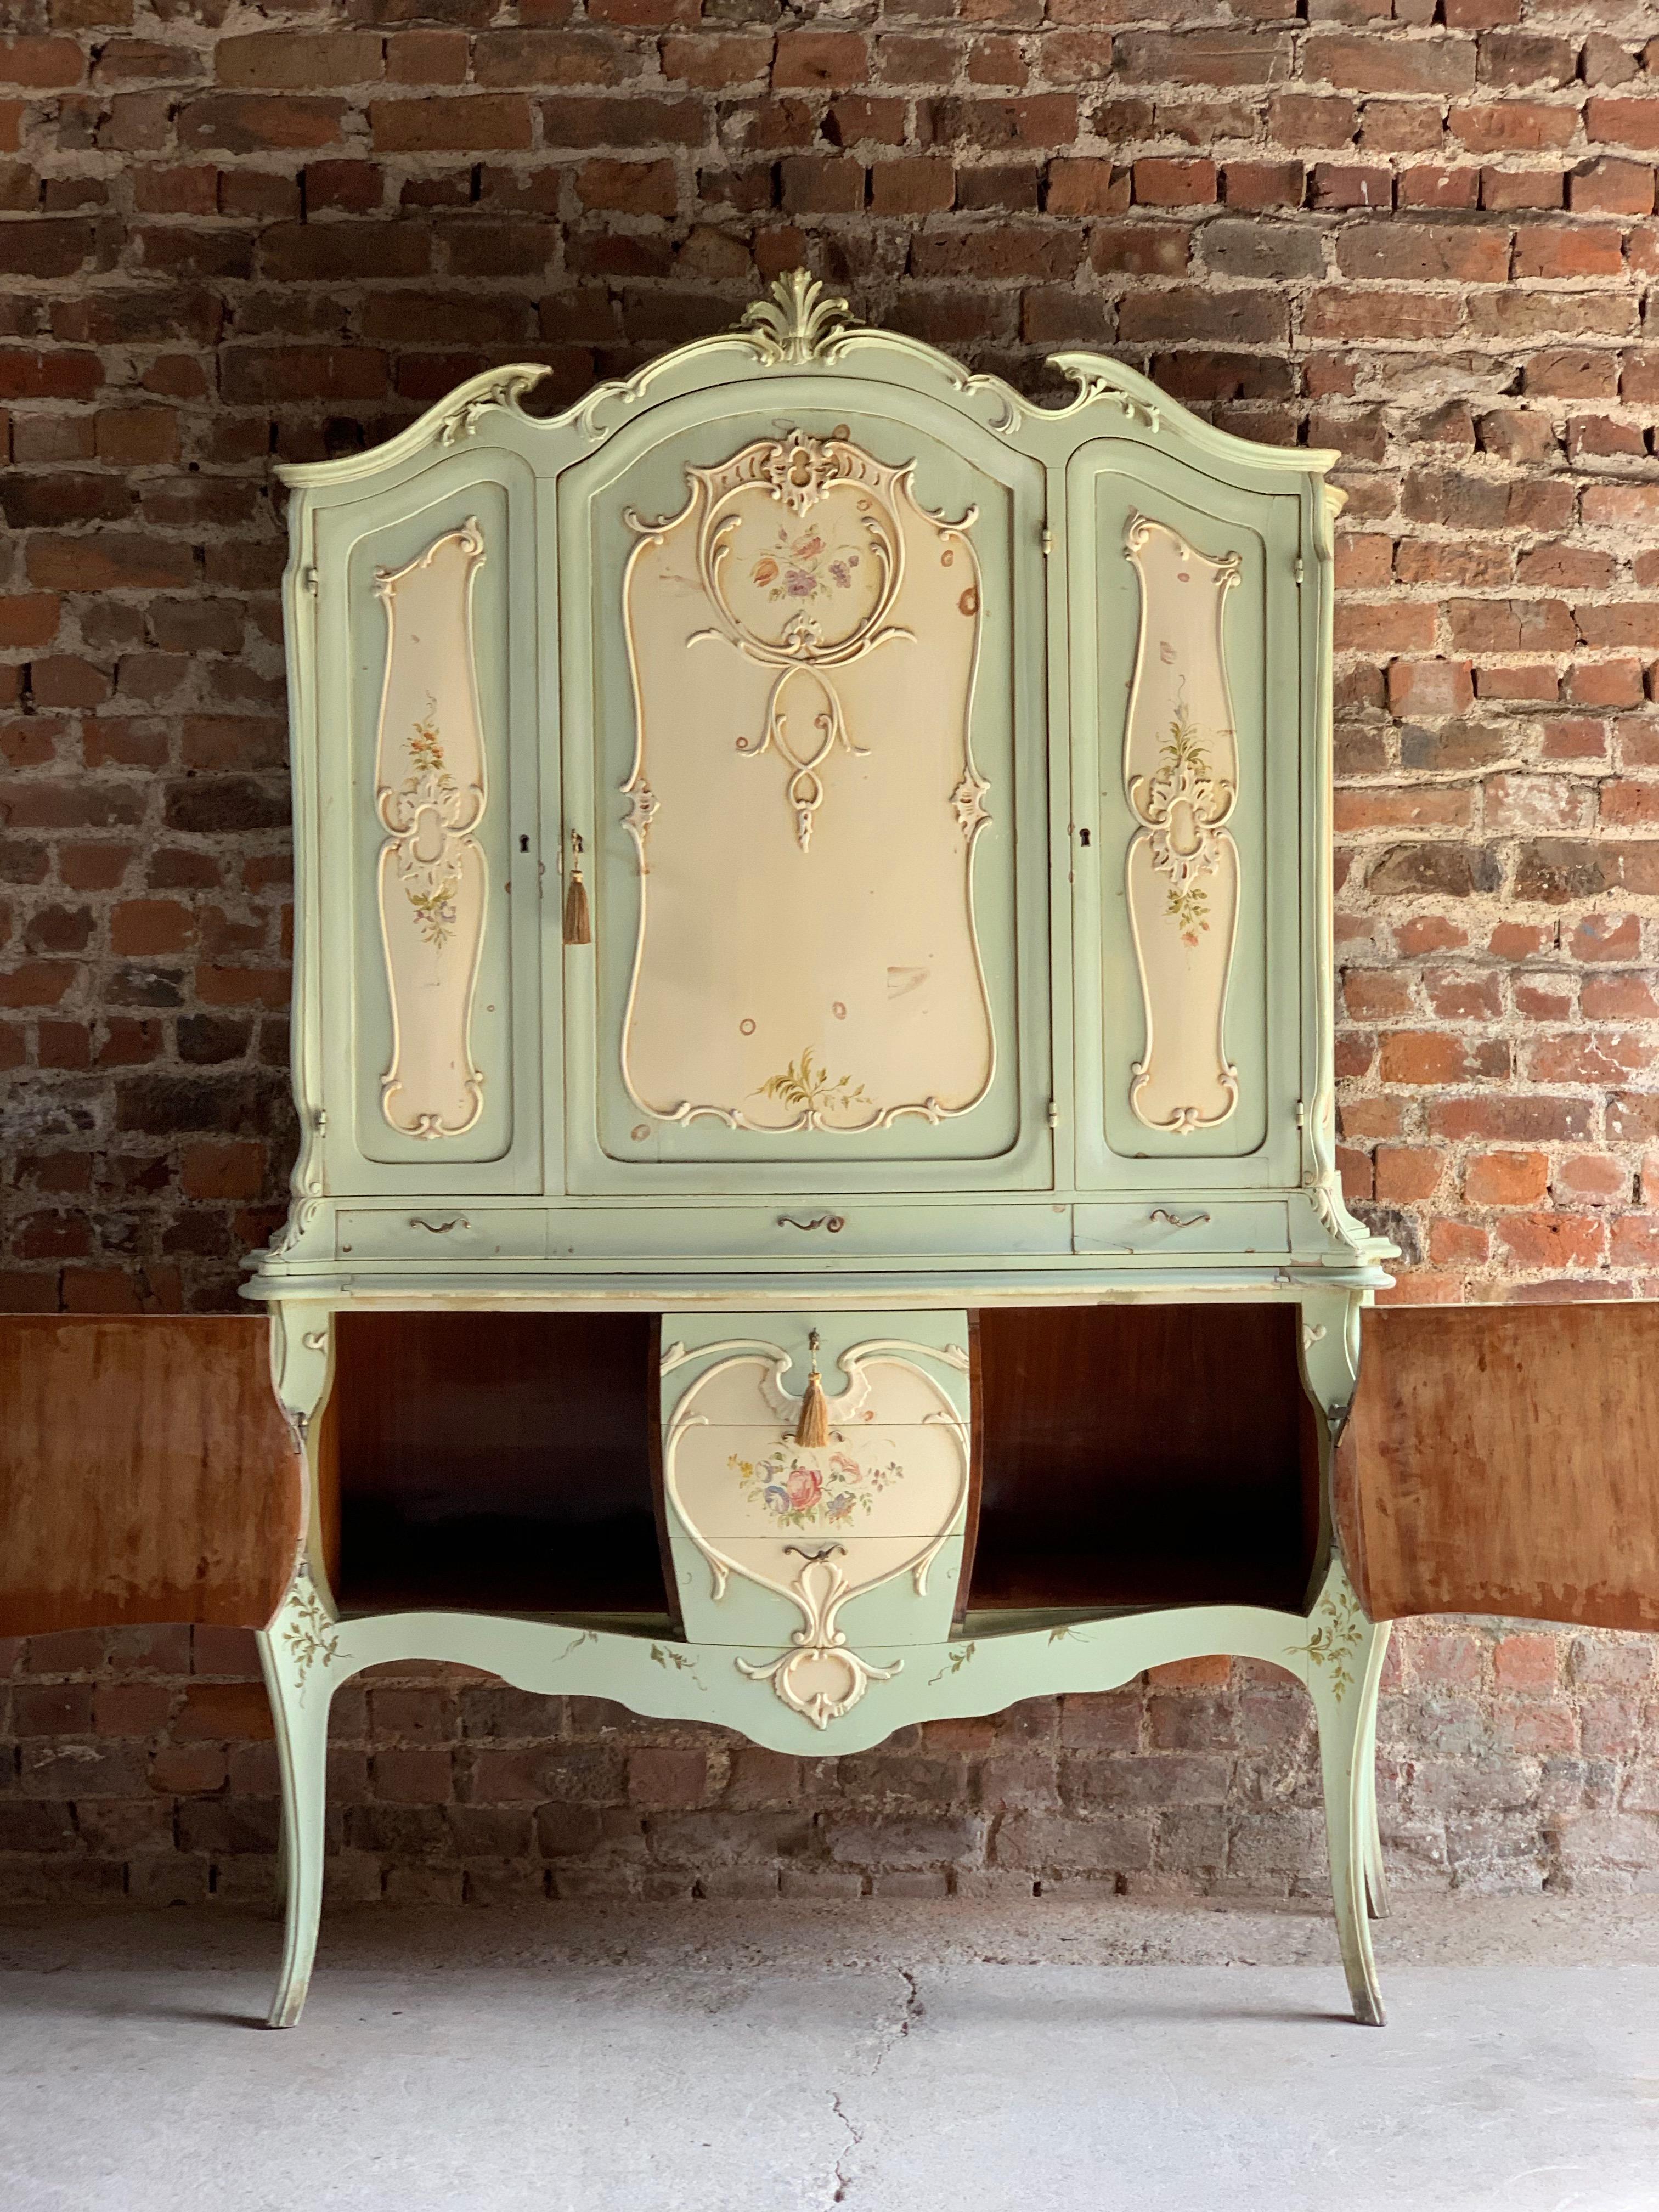 A magnificent and decadent original lavishly carved and painted late 19th century French Louis XV style cabinet commode, France, circa 1890, the arched and scalloped moulded cornice embellished with foliage and flowers in carved relief, offering